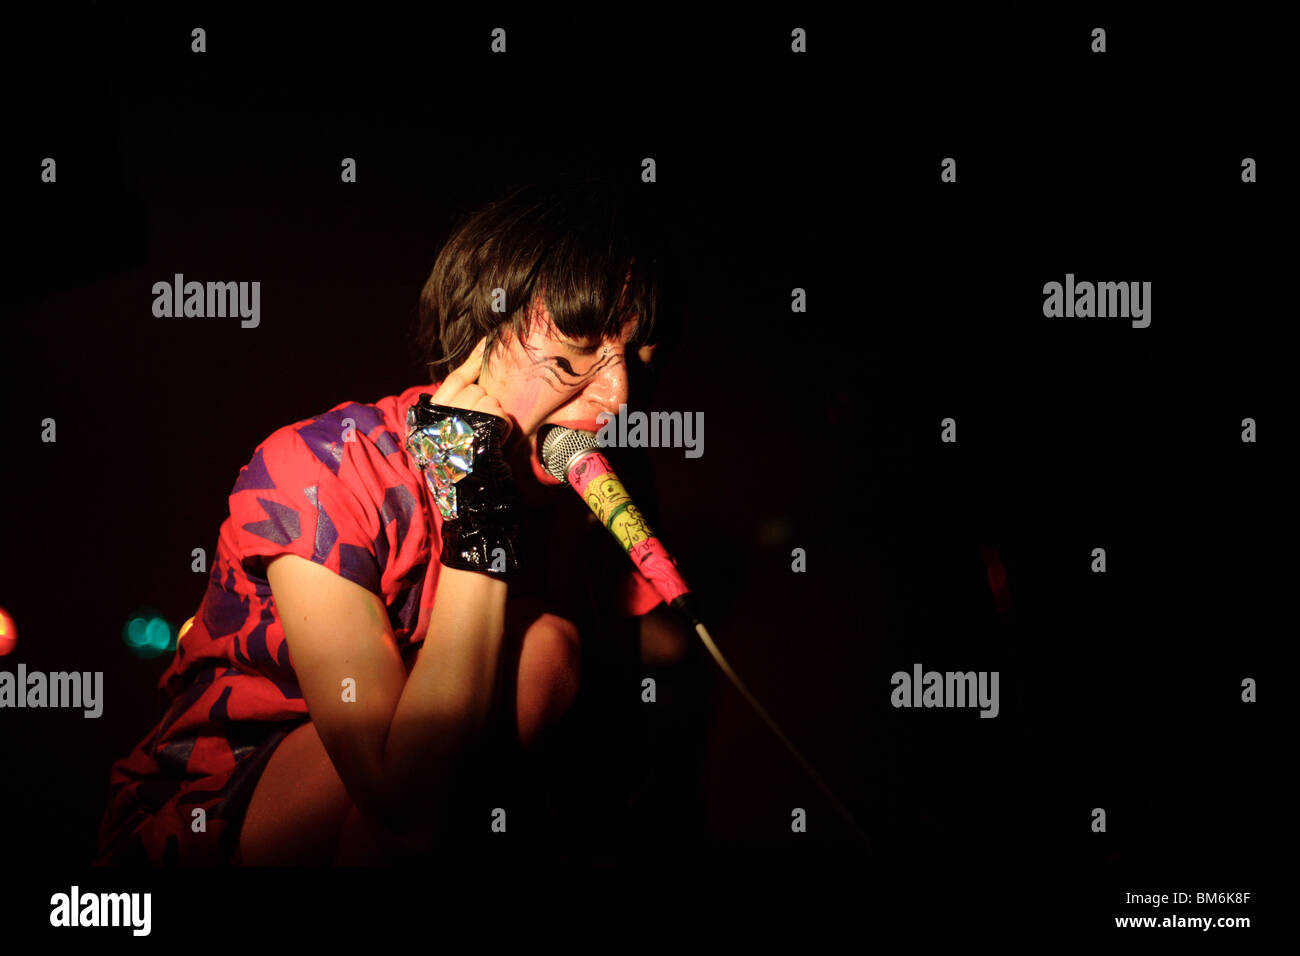 Karen O of the Yeah Yeah Yeahs screaming into a microphone shoved in her mouth at a concert in Omaha, Nebraska. Stock Photo